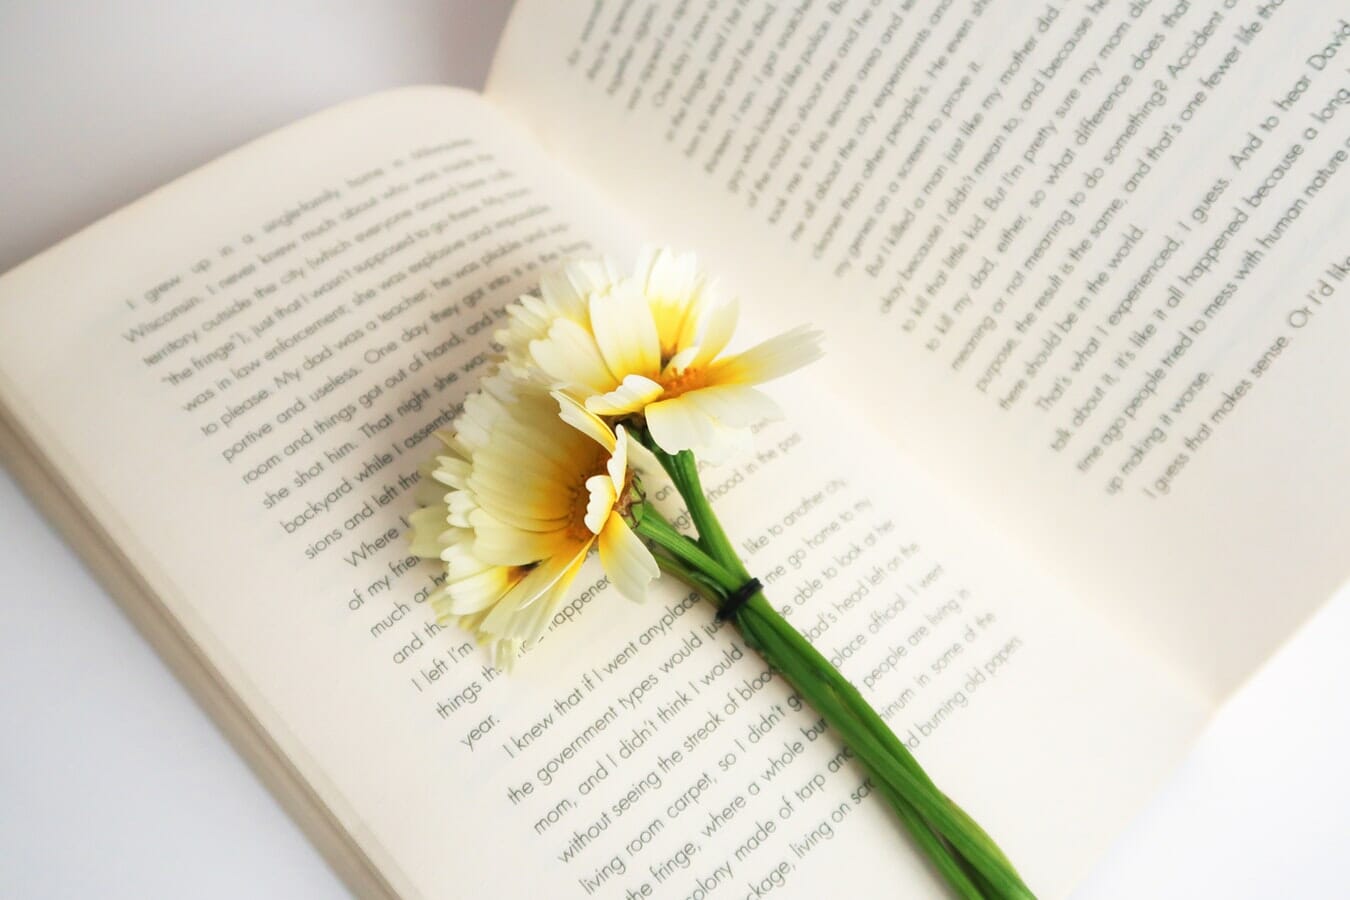 A flower sits on top of an open book.